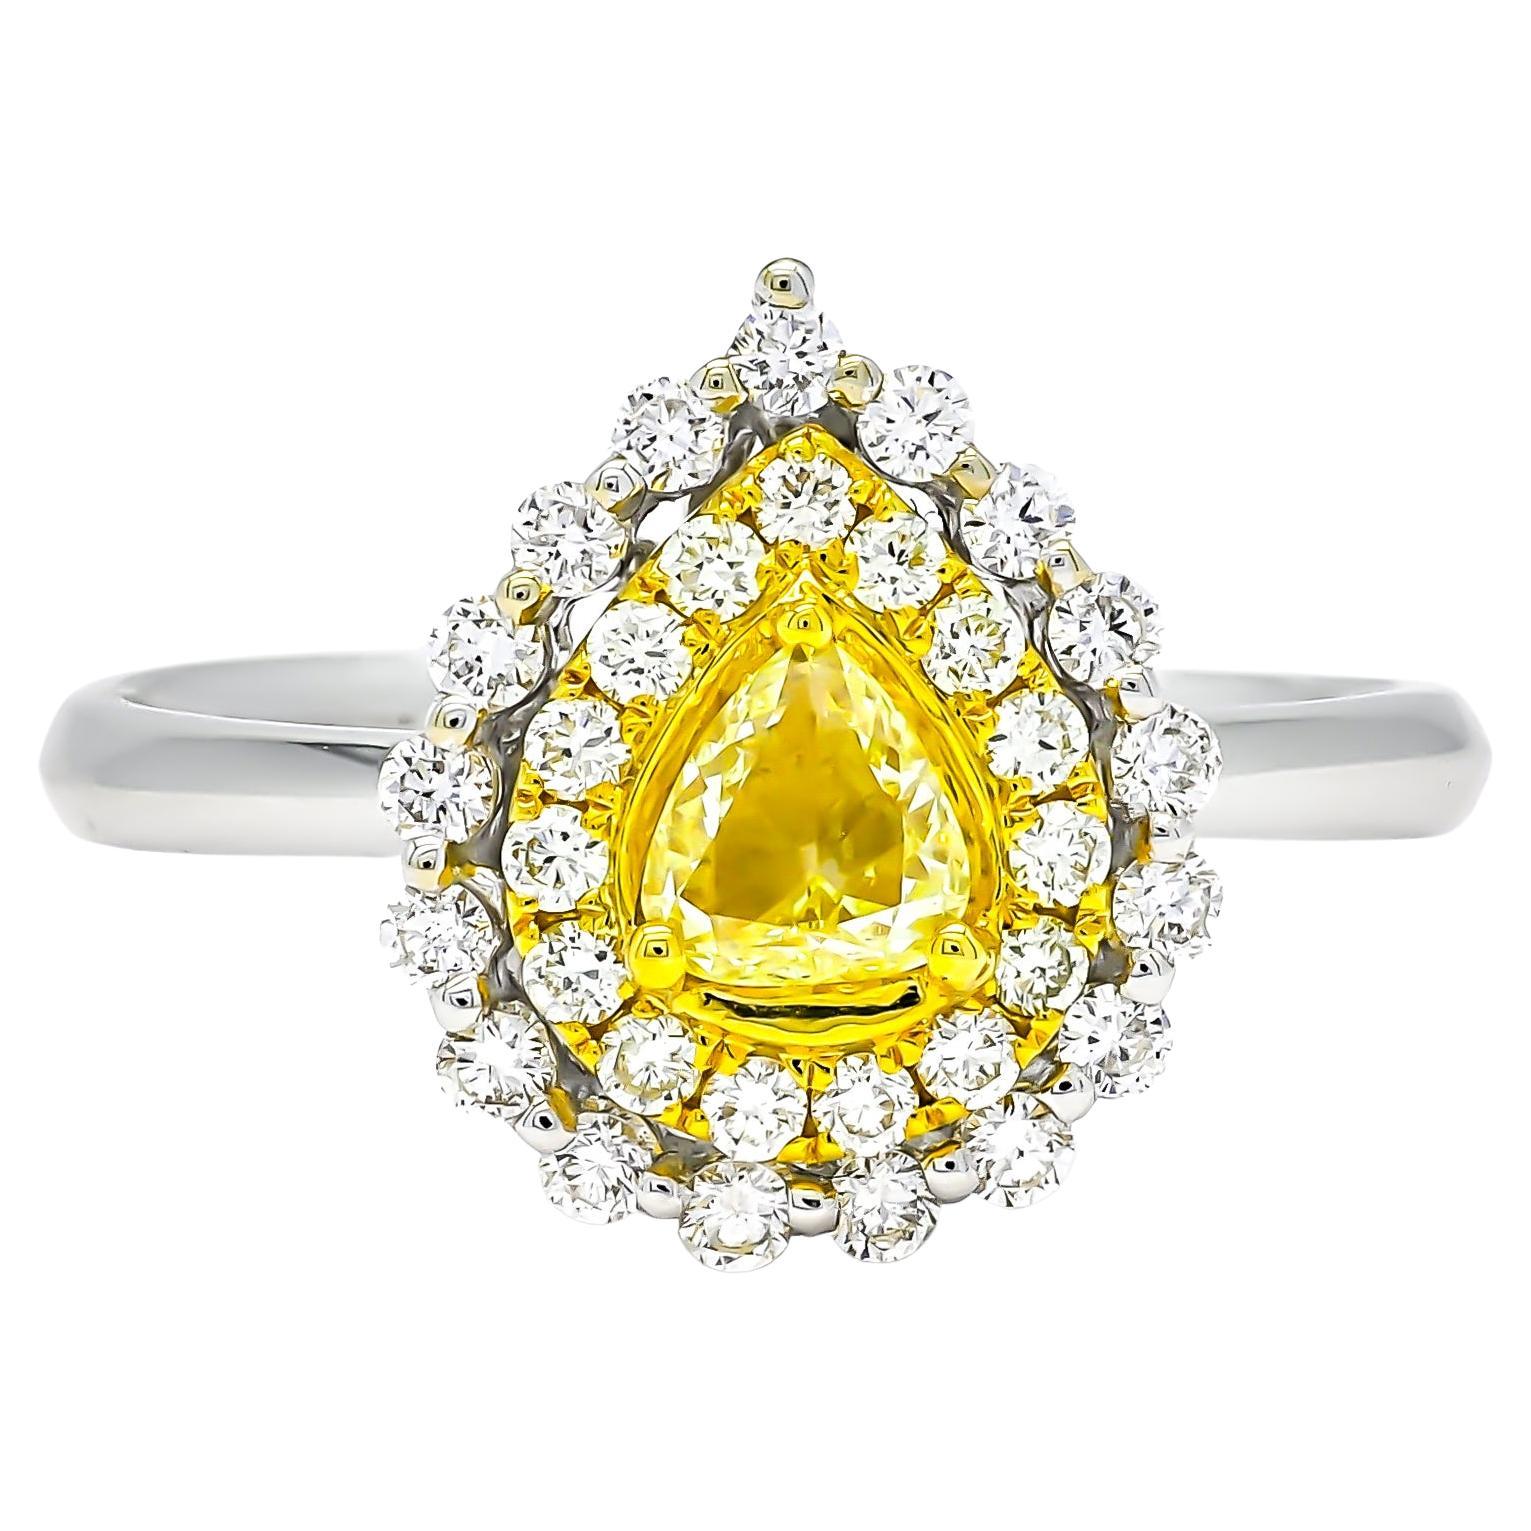 18KT White Gold Fancy Yellow Pear Shape Diamonds Double Halo Engagement Ring